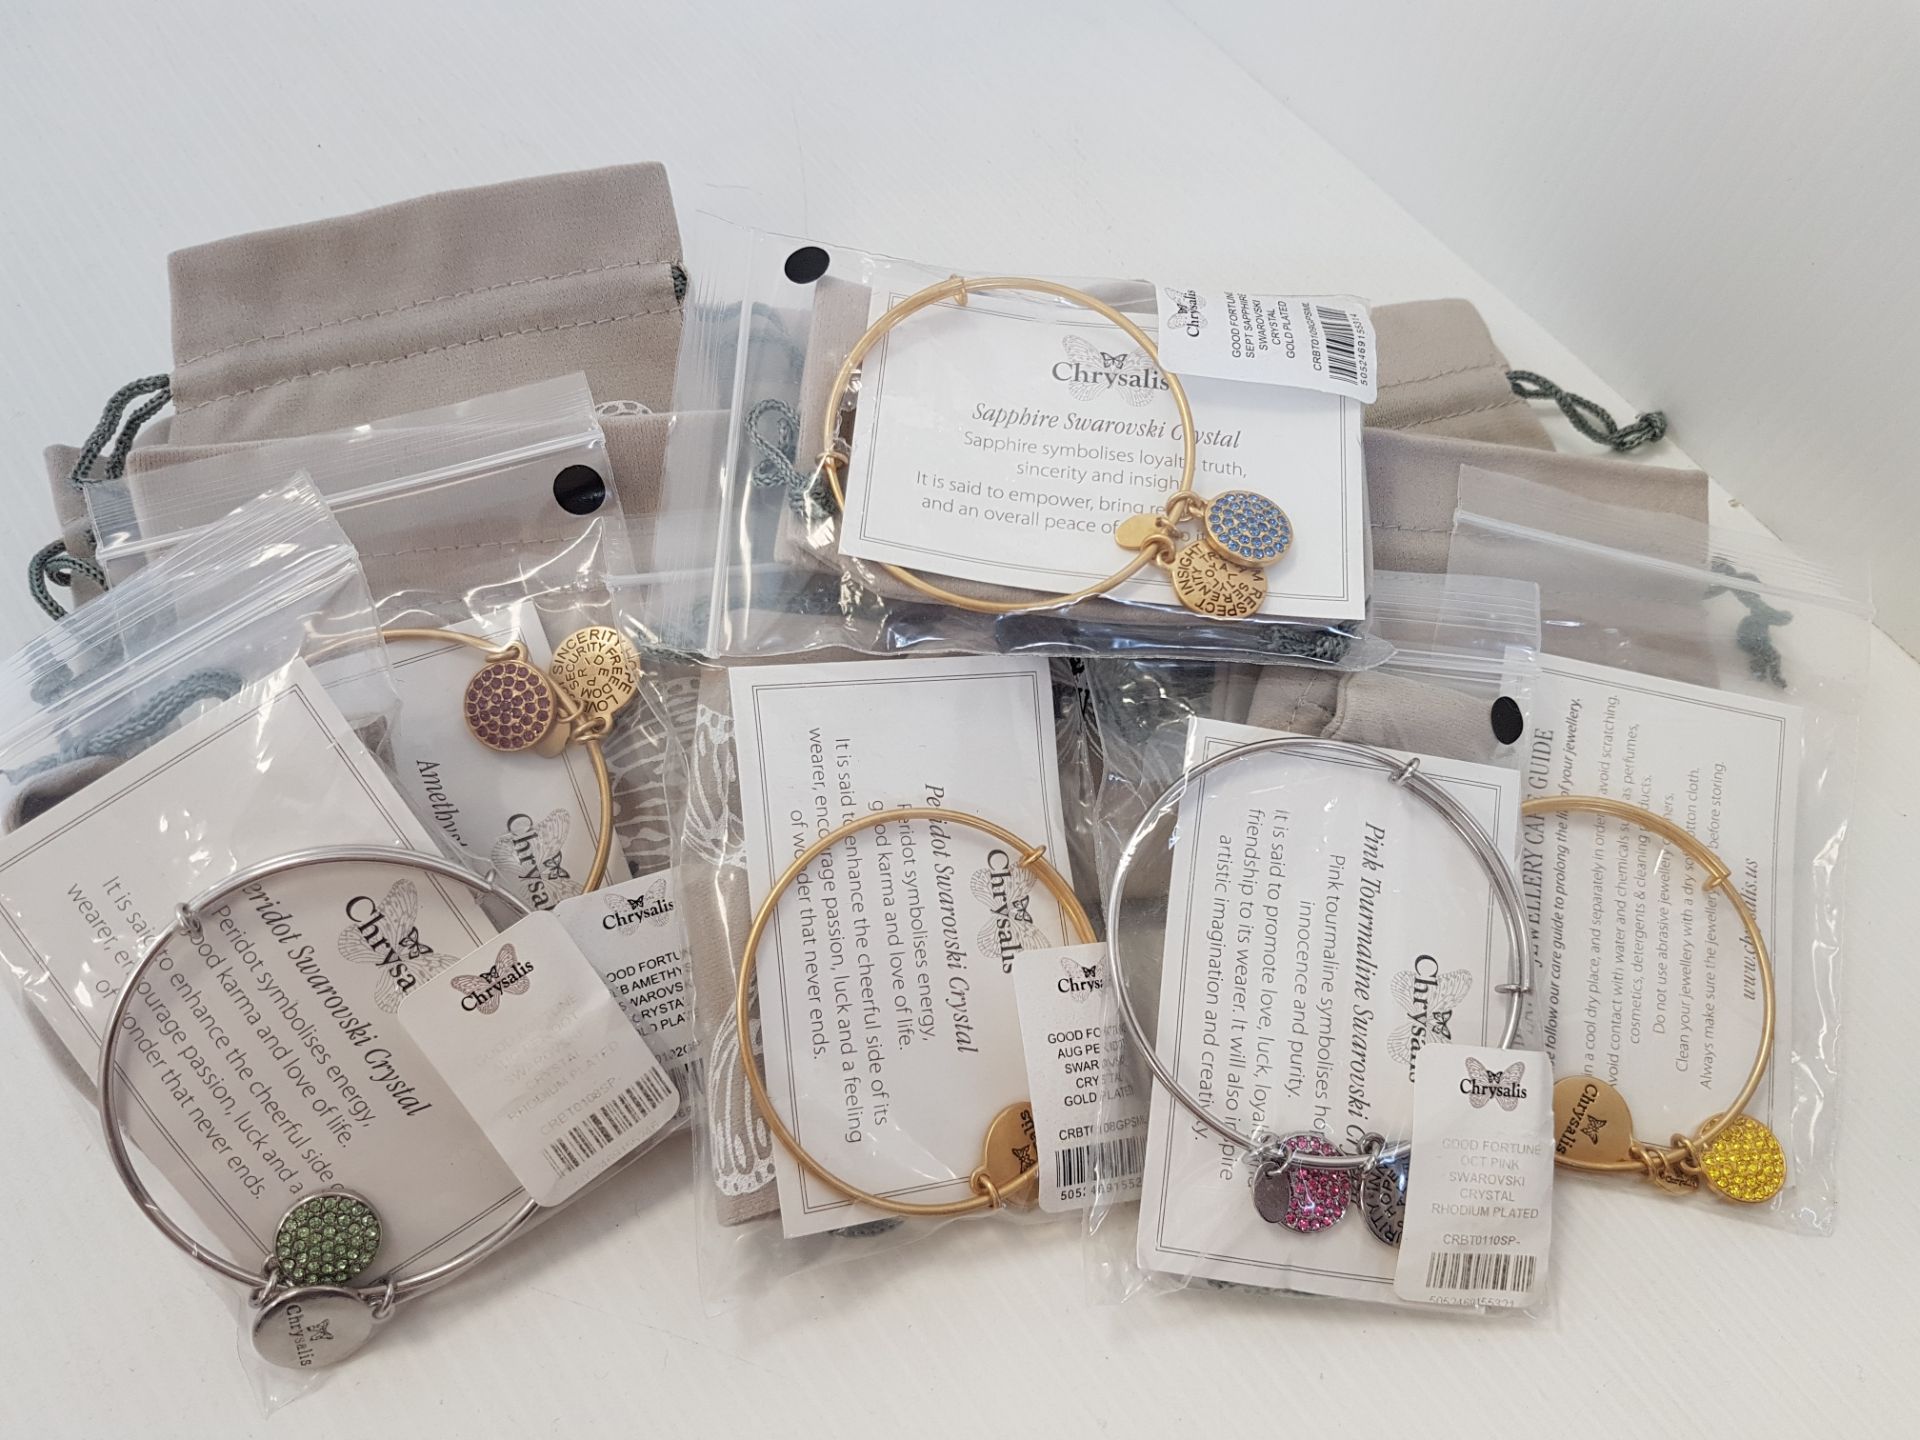 12 x various Chrysalis 'Good Fortune' expandable birthstone bangles with Swarovski crystals (4 x